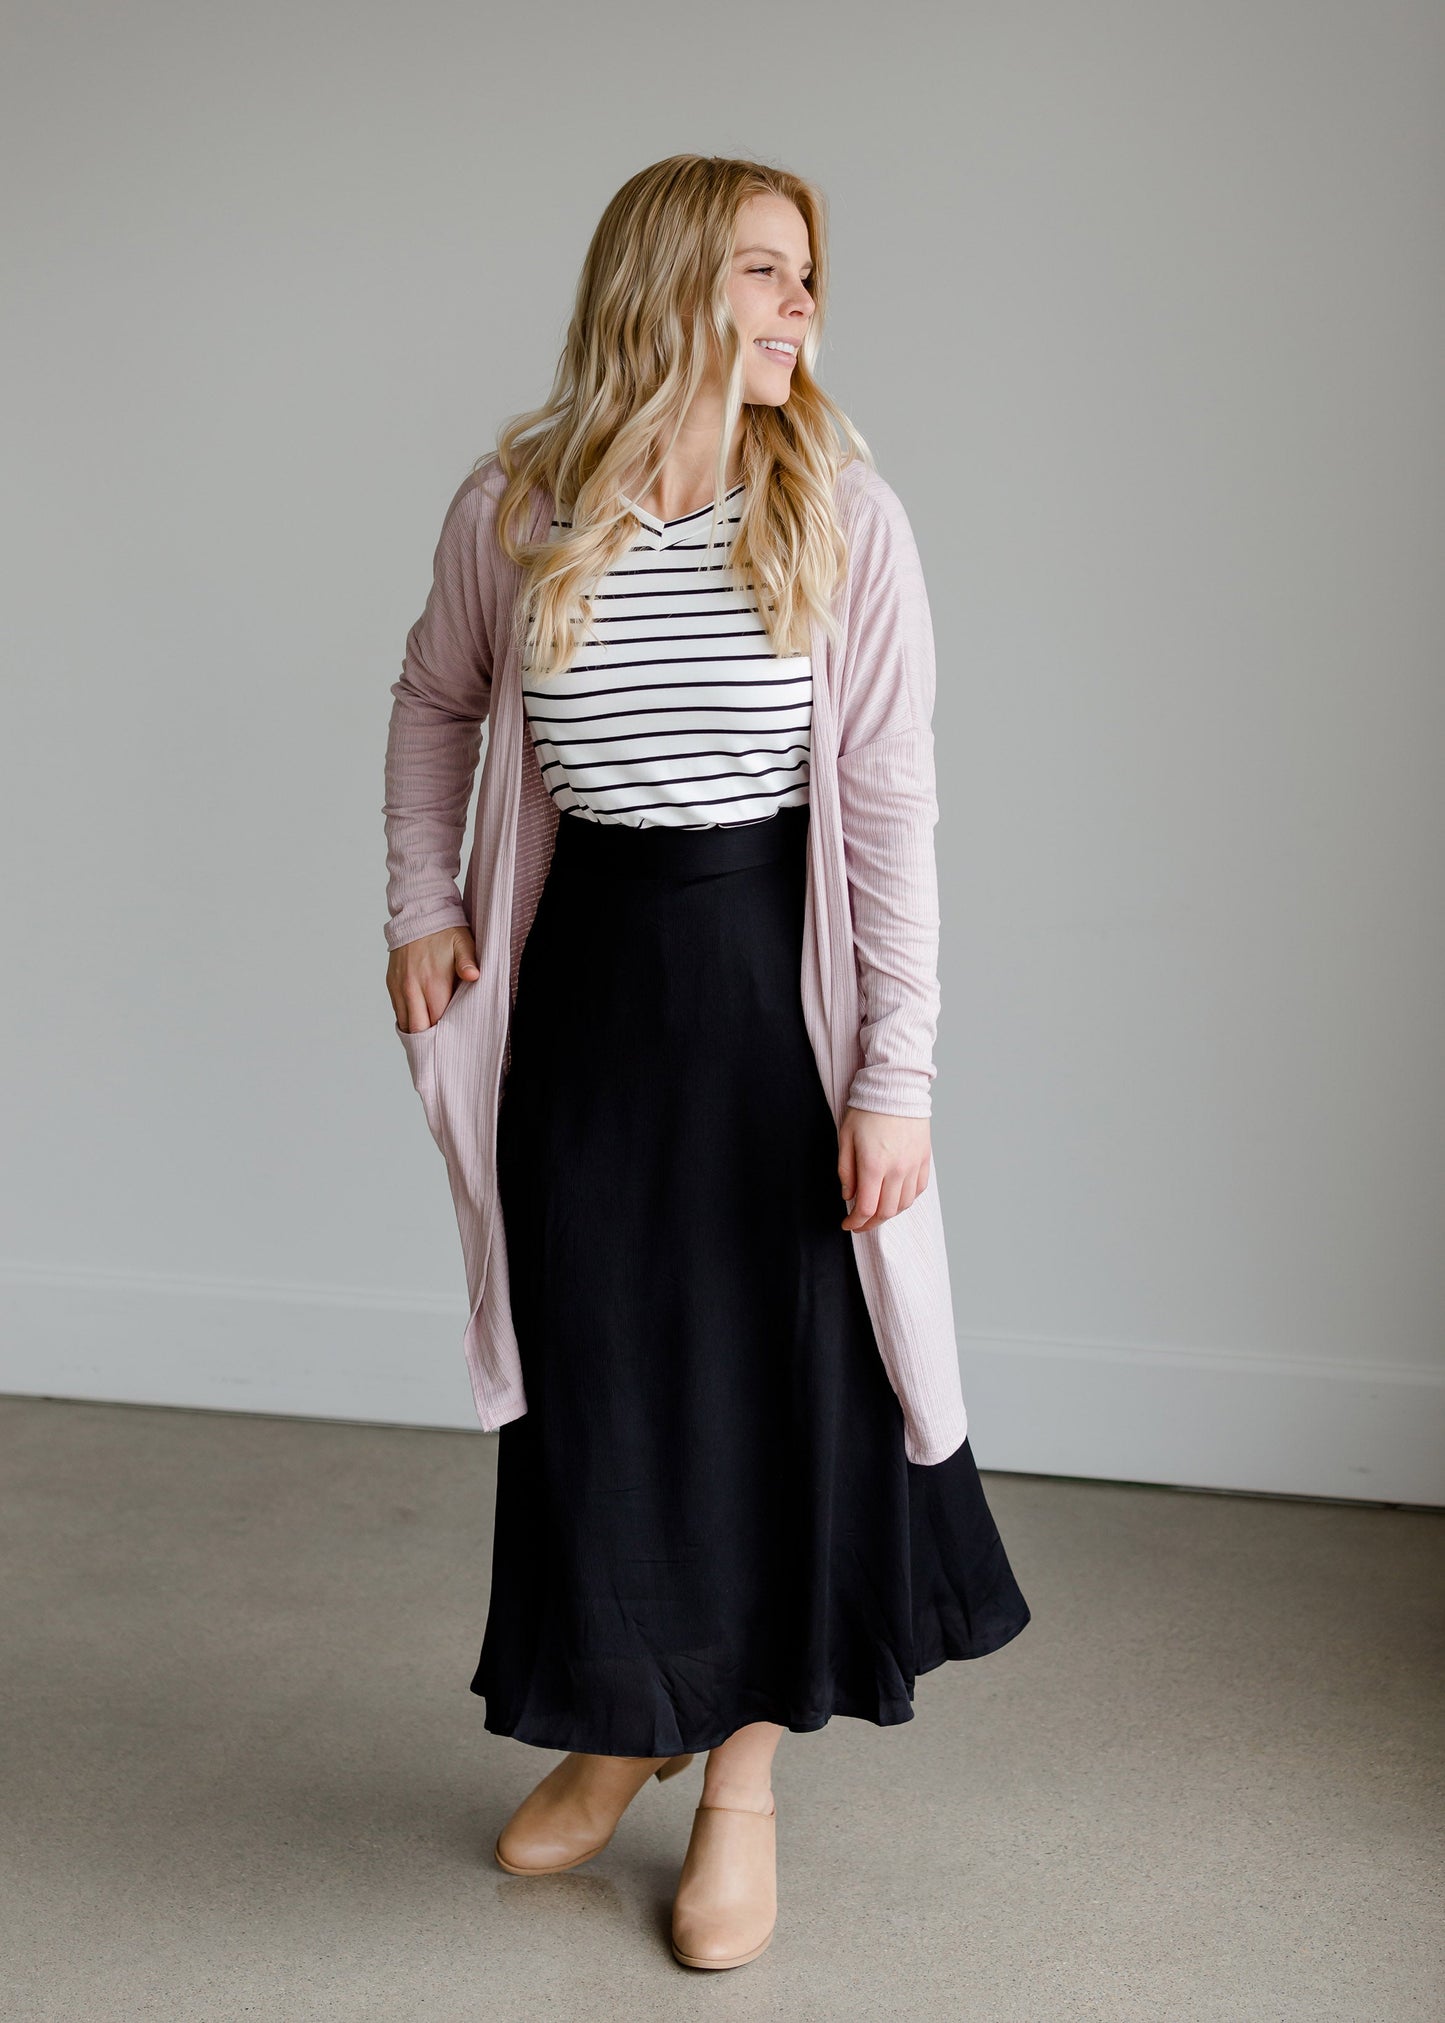 Pointelle Ribbed Pink Pocket Cardigan - FINAL SALE Layering Essentials